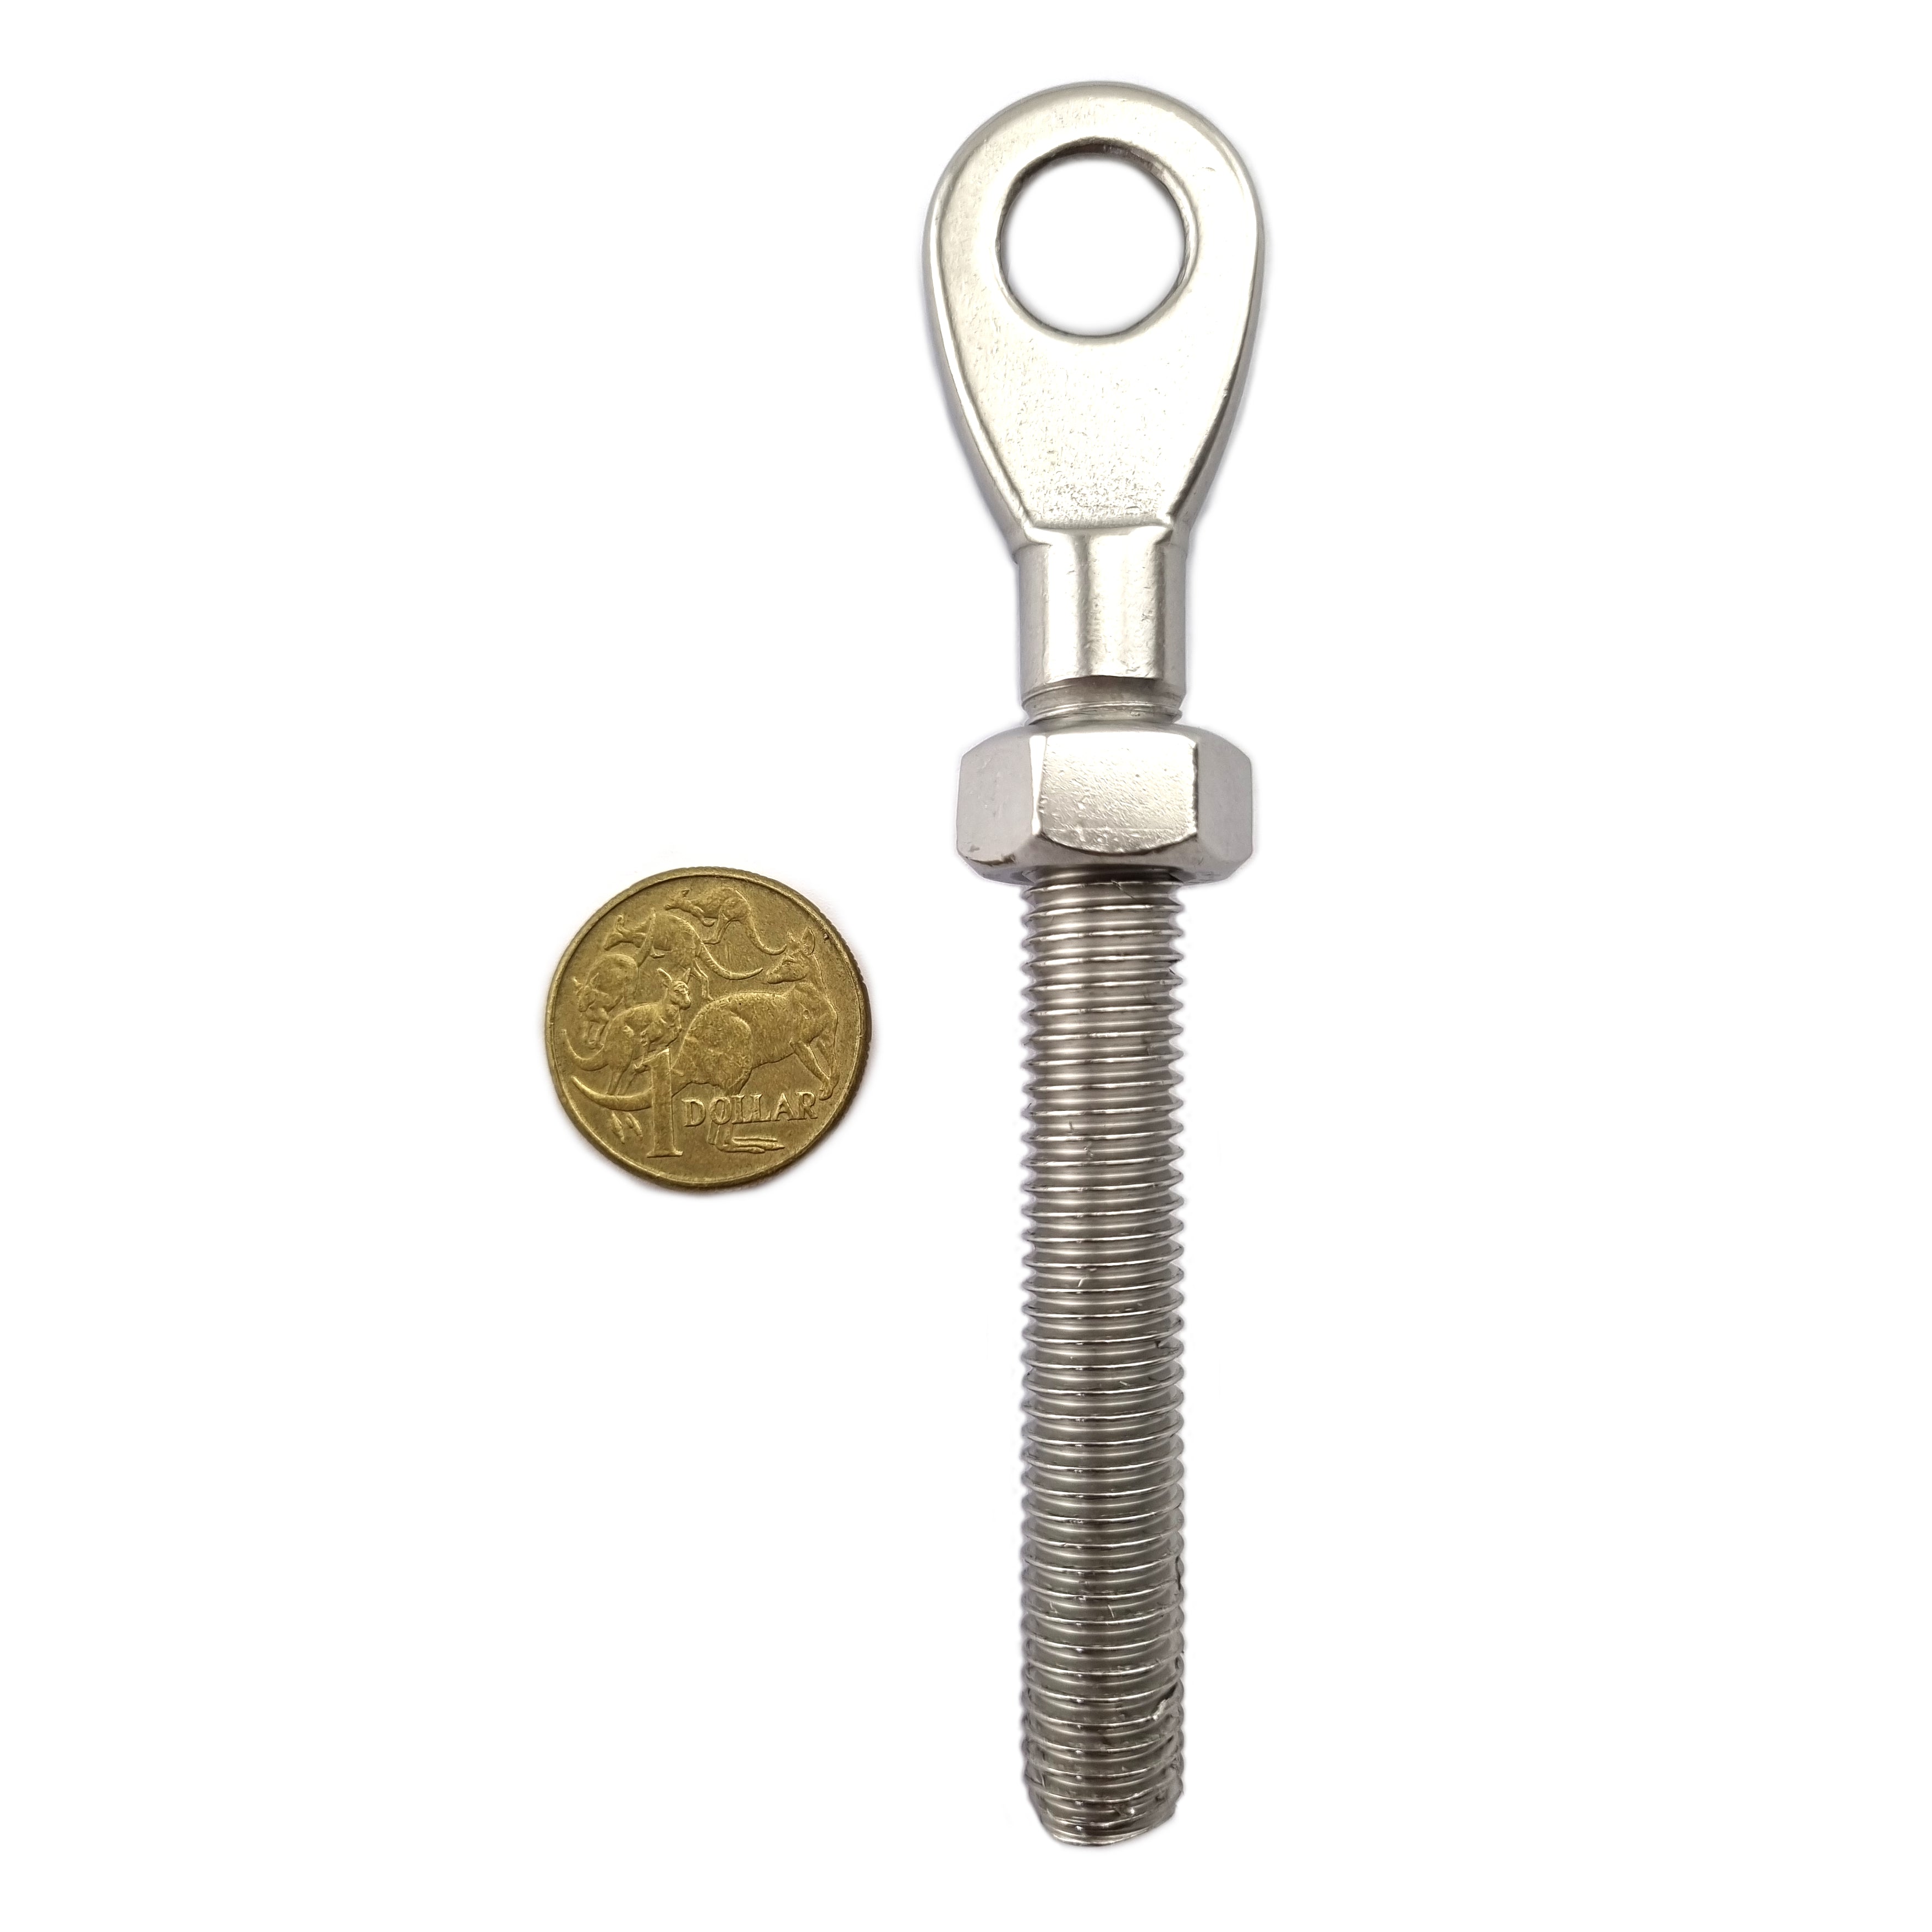 12mm Eye Terminal in Stainless Steel with an 80mm thread. Shop chain.com.au